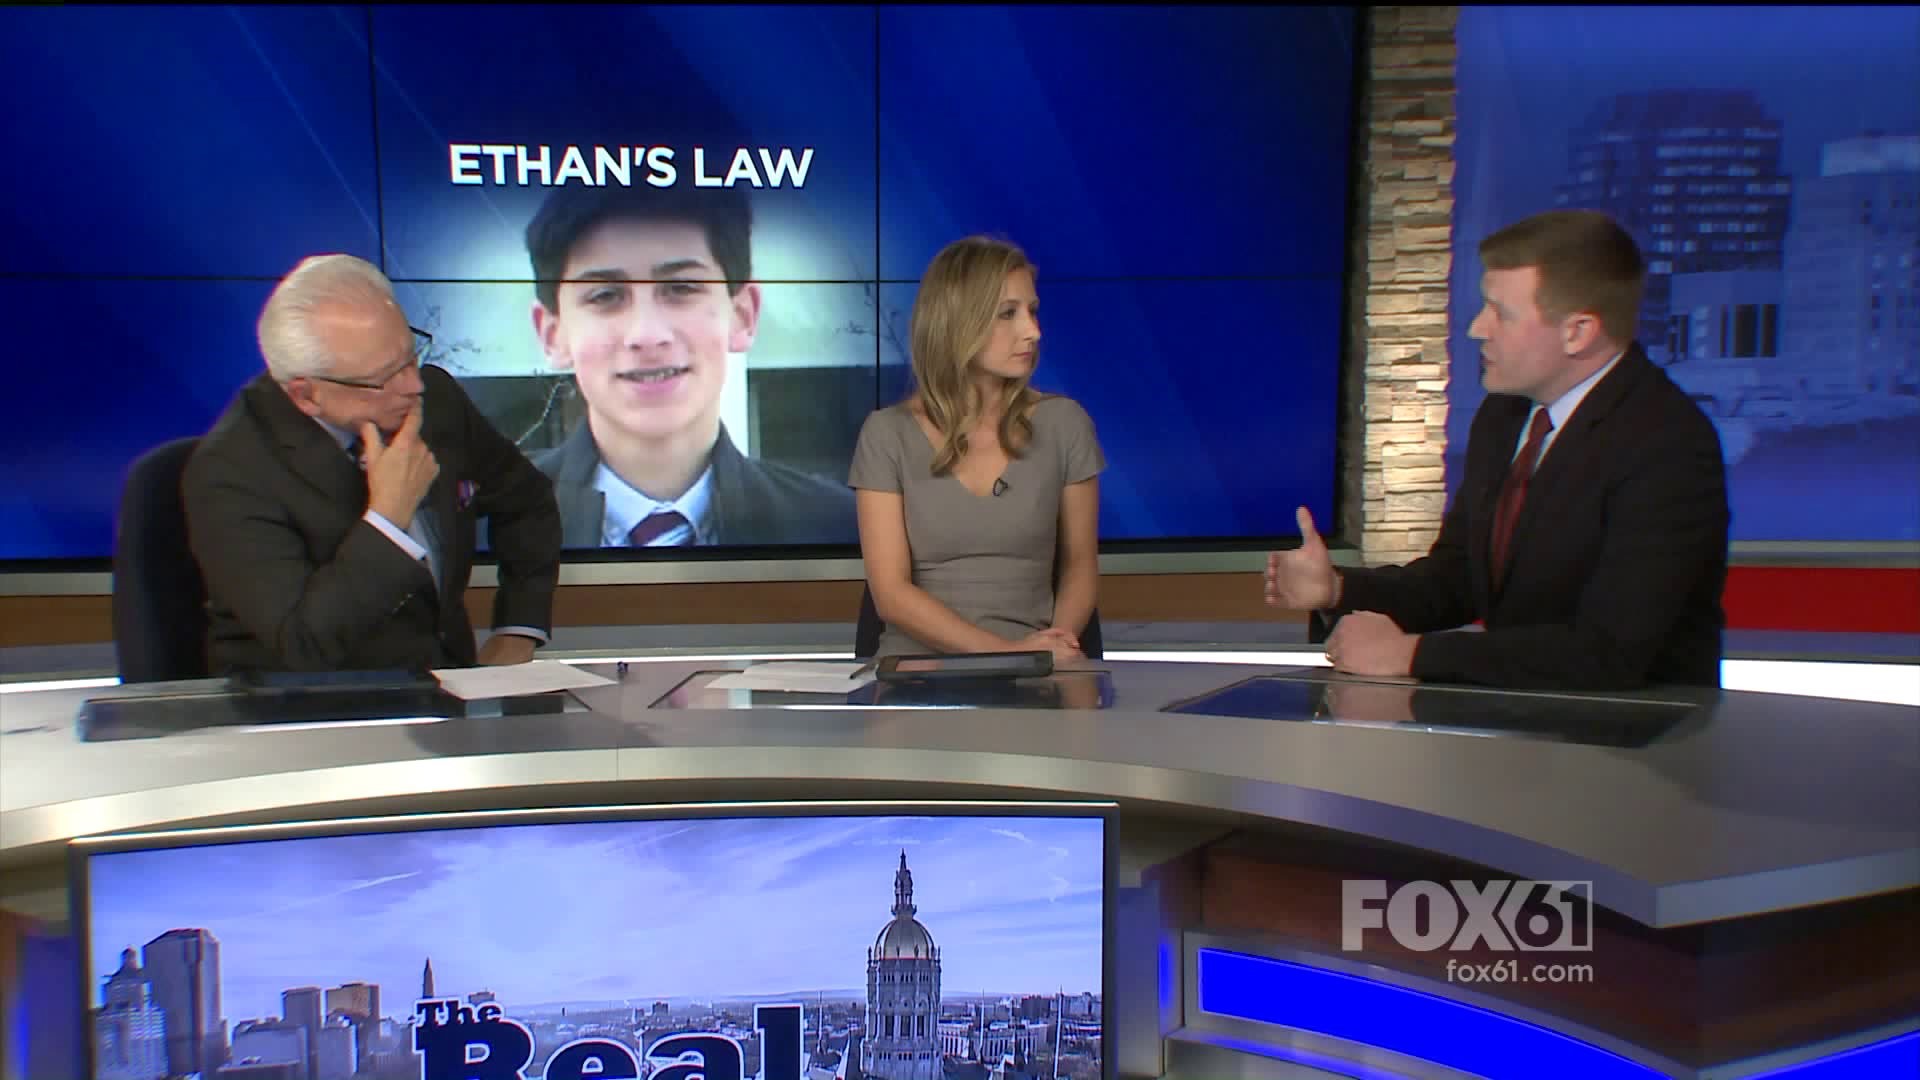 Real Story - Ethans Law